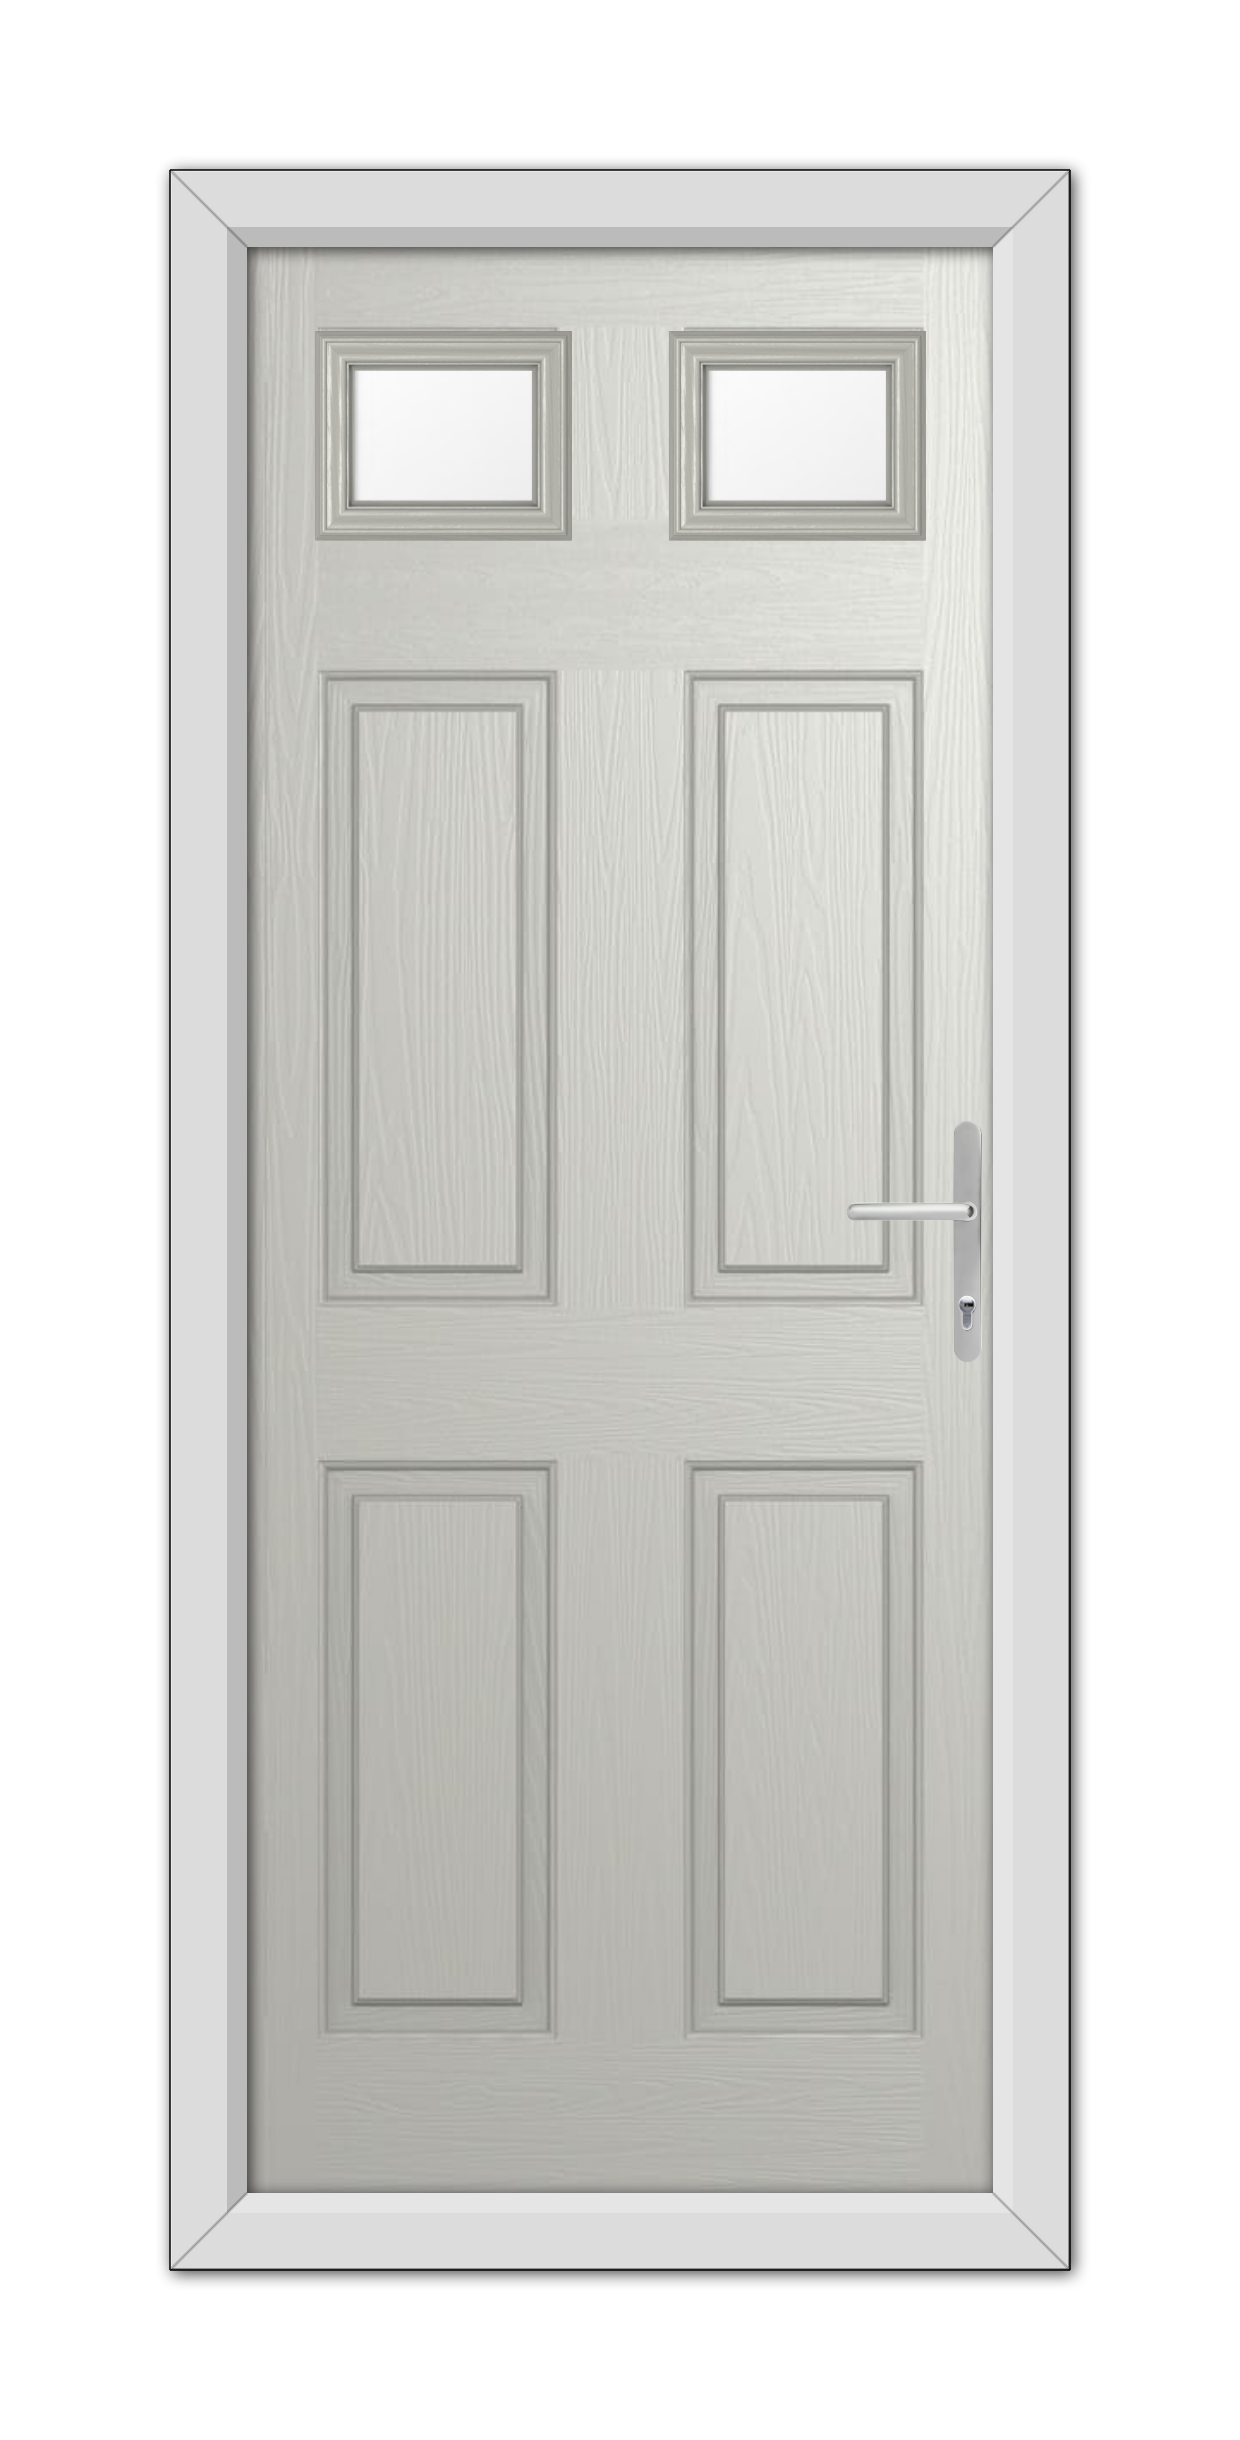 A modern Agate Grey Middleton Glazed 2 Composite Door 48mm Timber Core with four rectangular panels and three small windows at the top, fitted with a metallic handle on the right side.